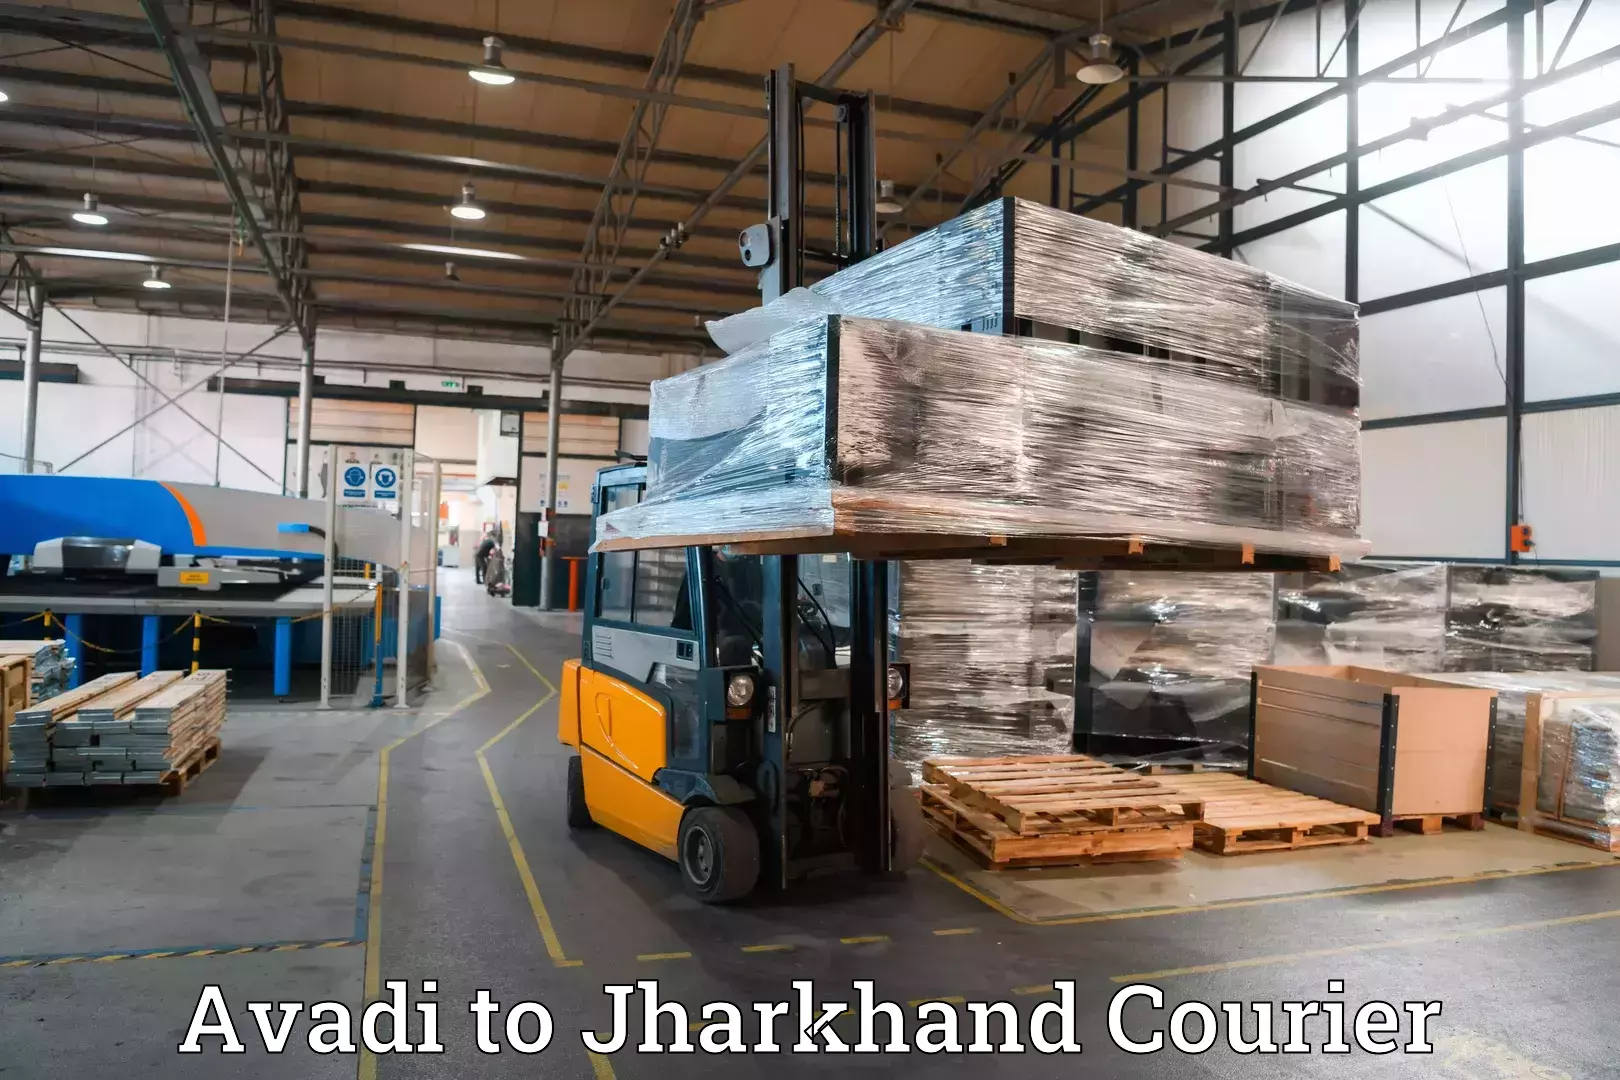 Luggage transport consultancy Avadi to Jharkhand